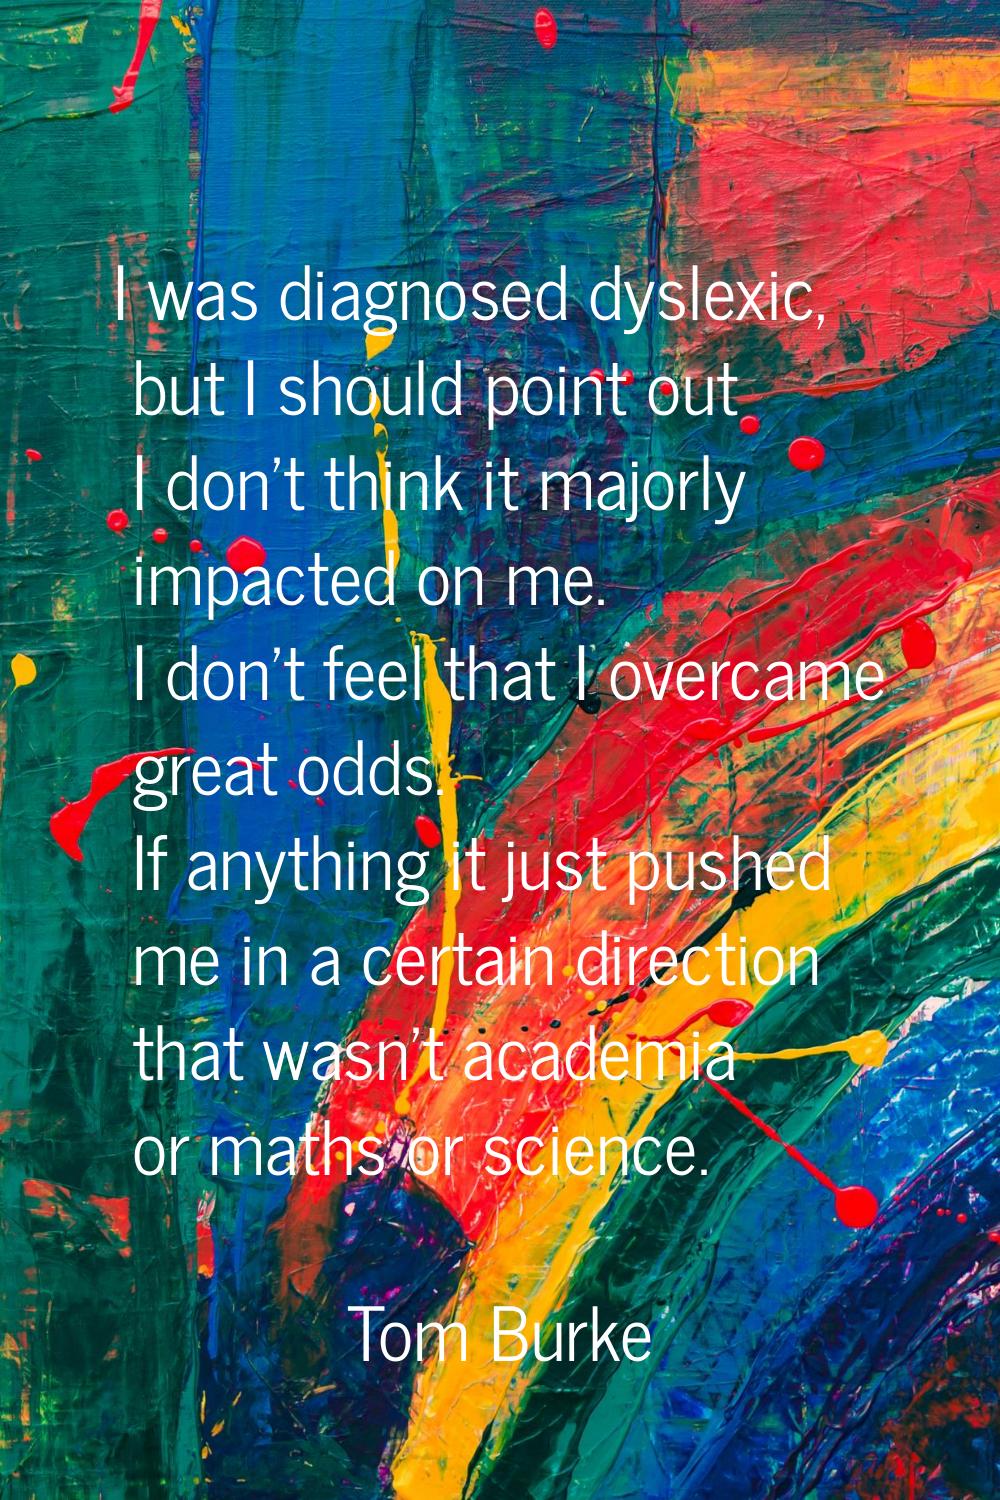 I was diagnosed dyslexic, but I should point out I don't think it majorly impacted on me. I don't f